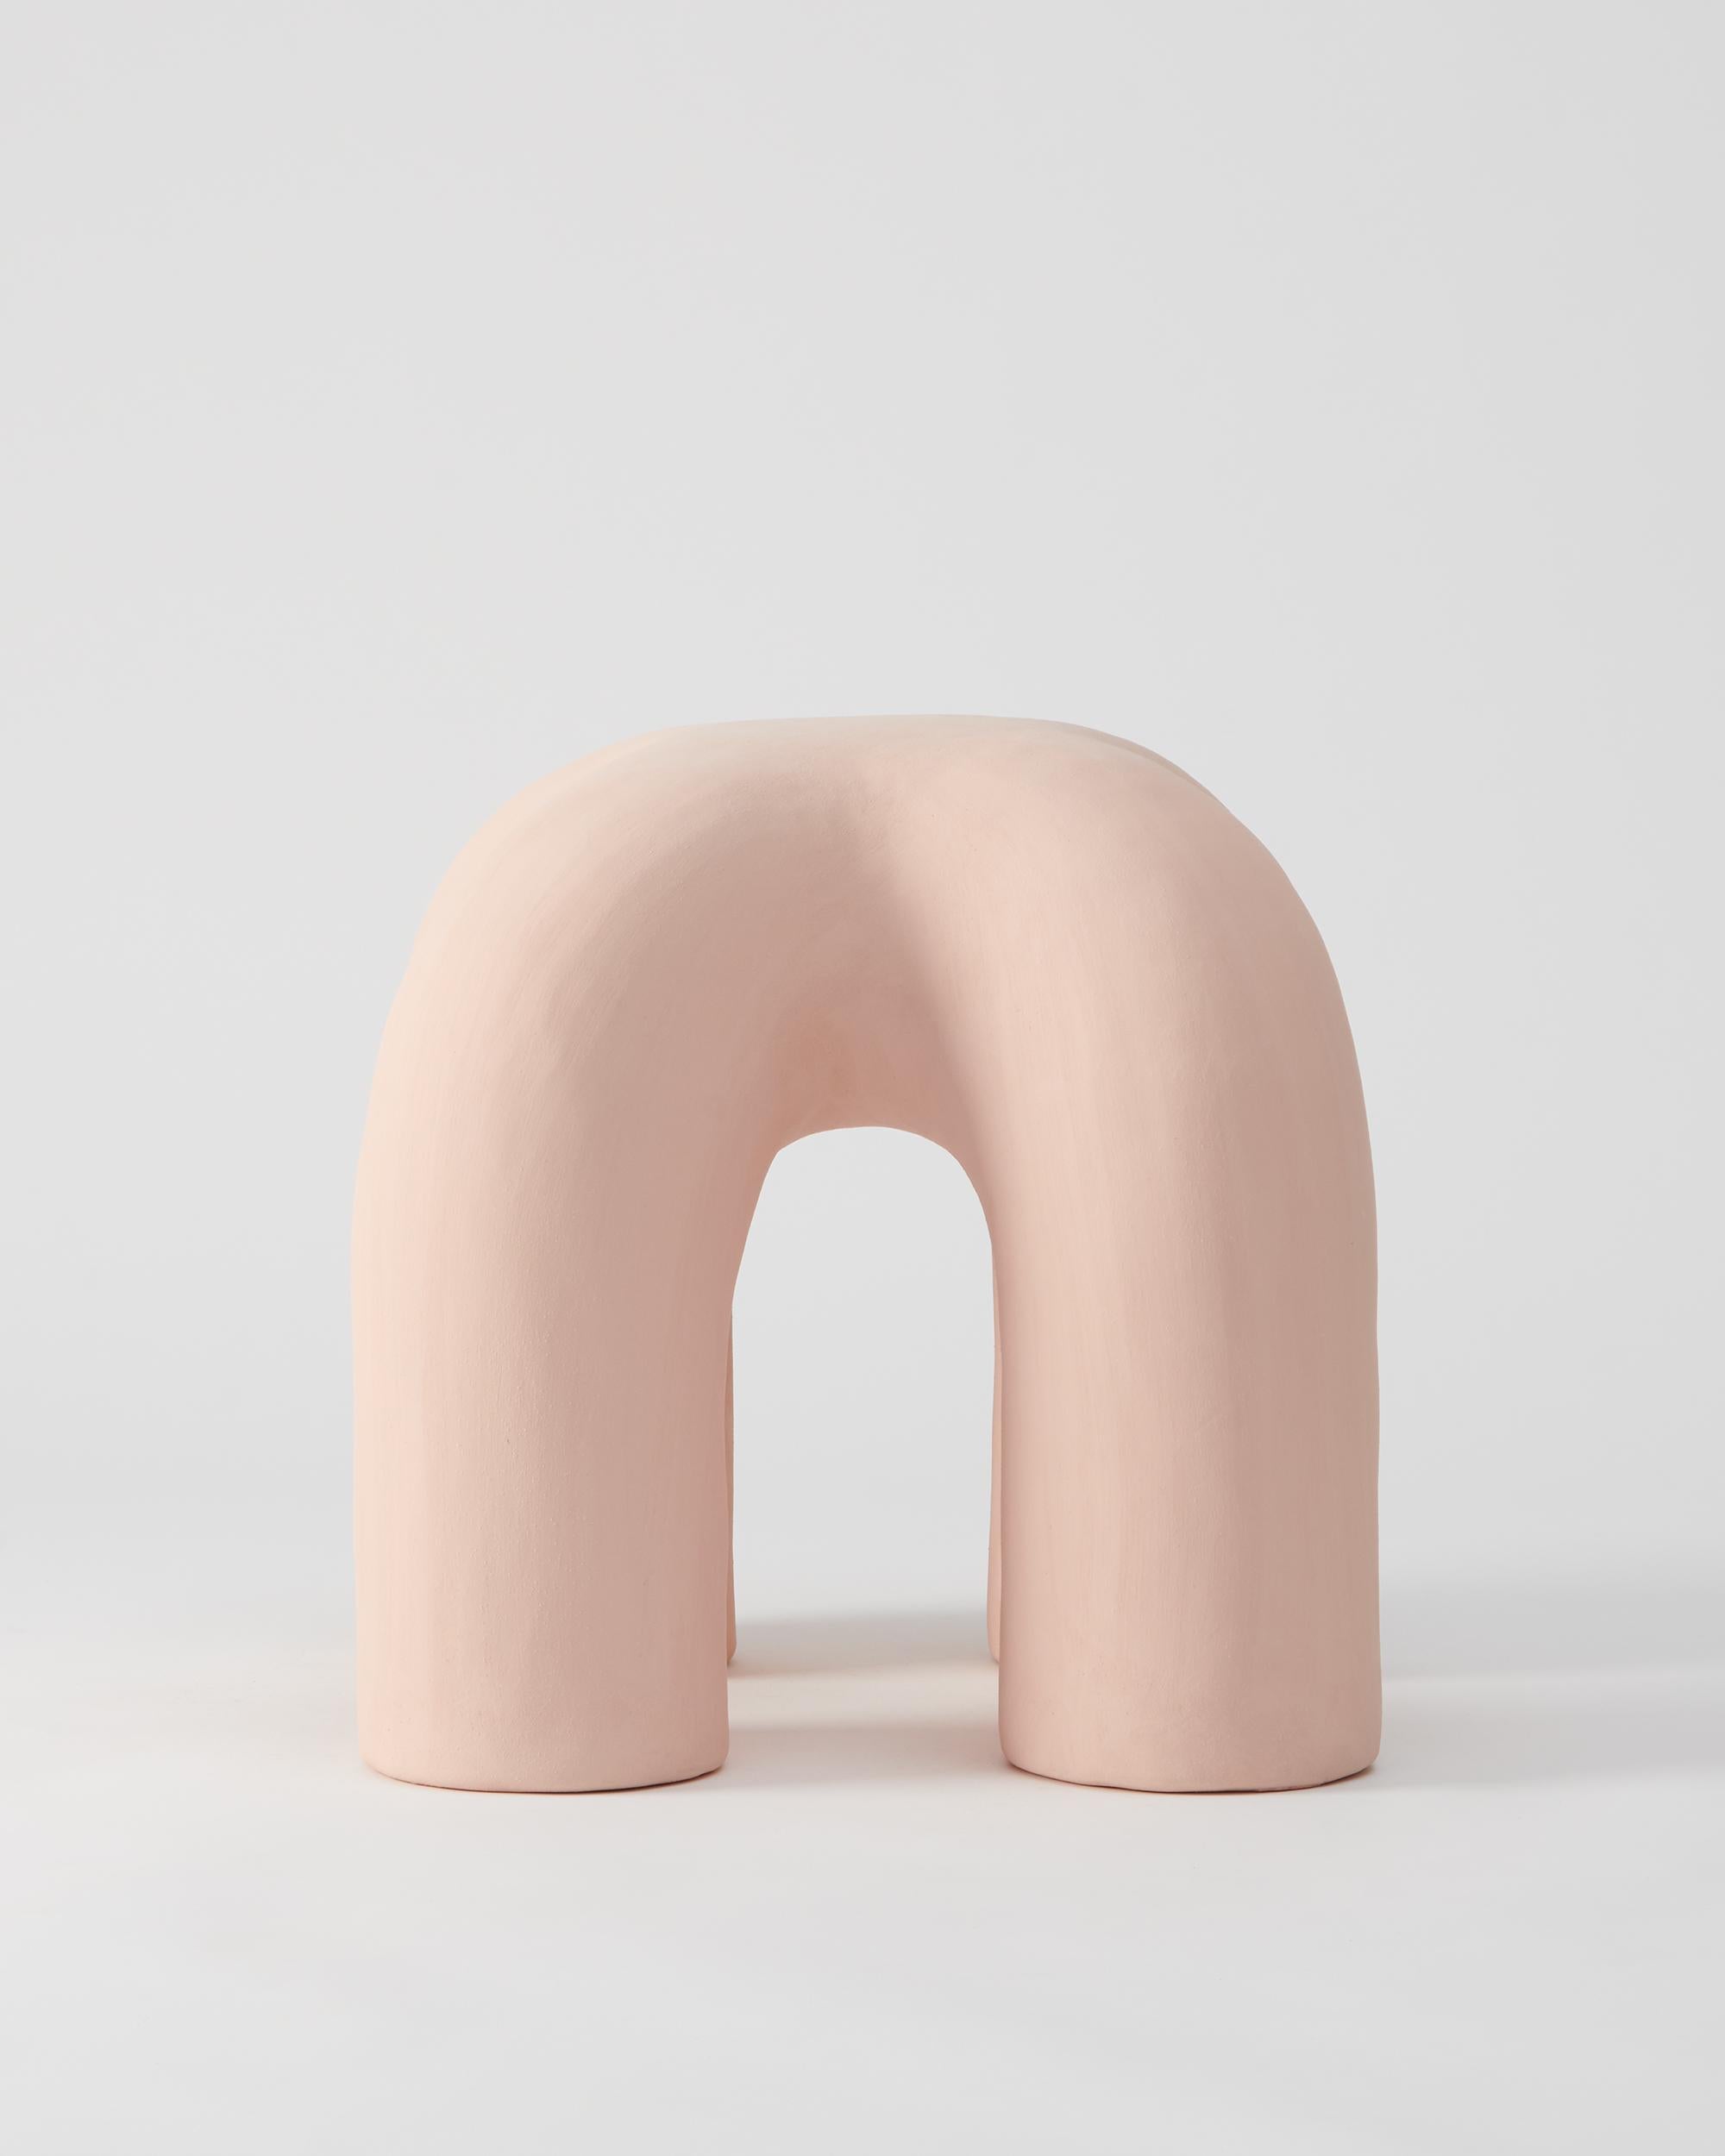 As part of the First Hand Collection - Part II, the stitch stool debuted at the International Contemporary Furniture Fair in 2019.
This whimsical stool is hand-built in our studio in Queens, New York.

Custom Glaze options are available.